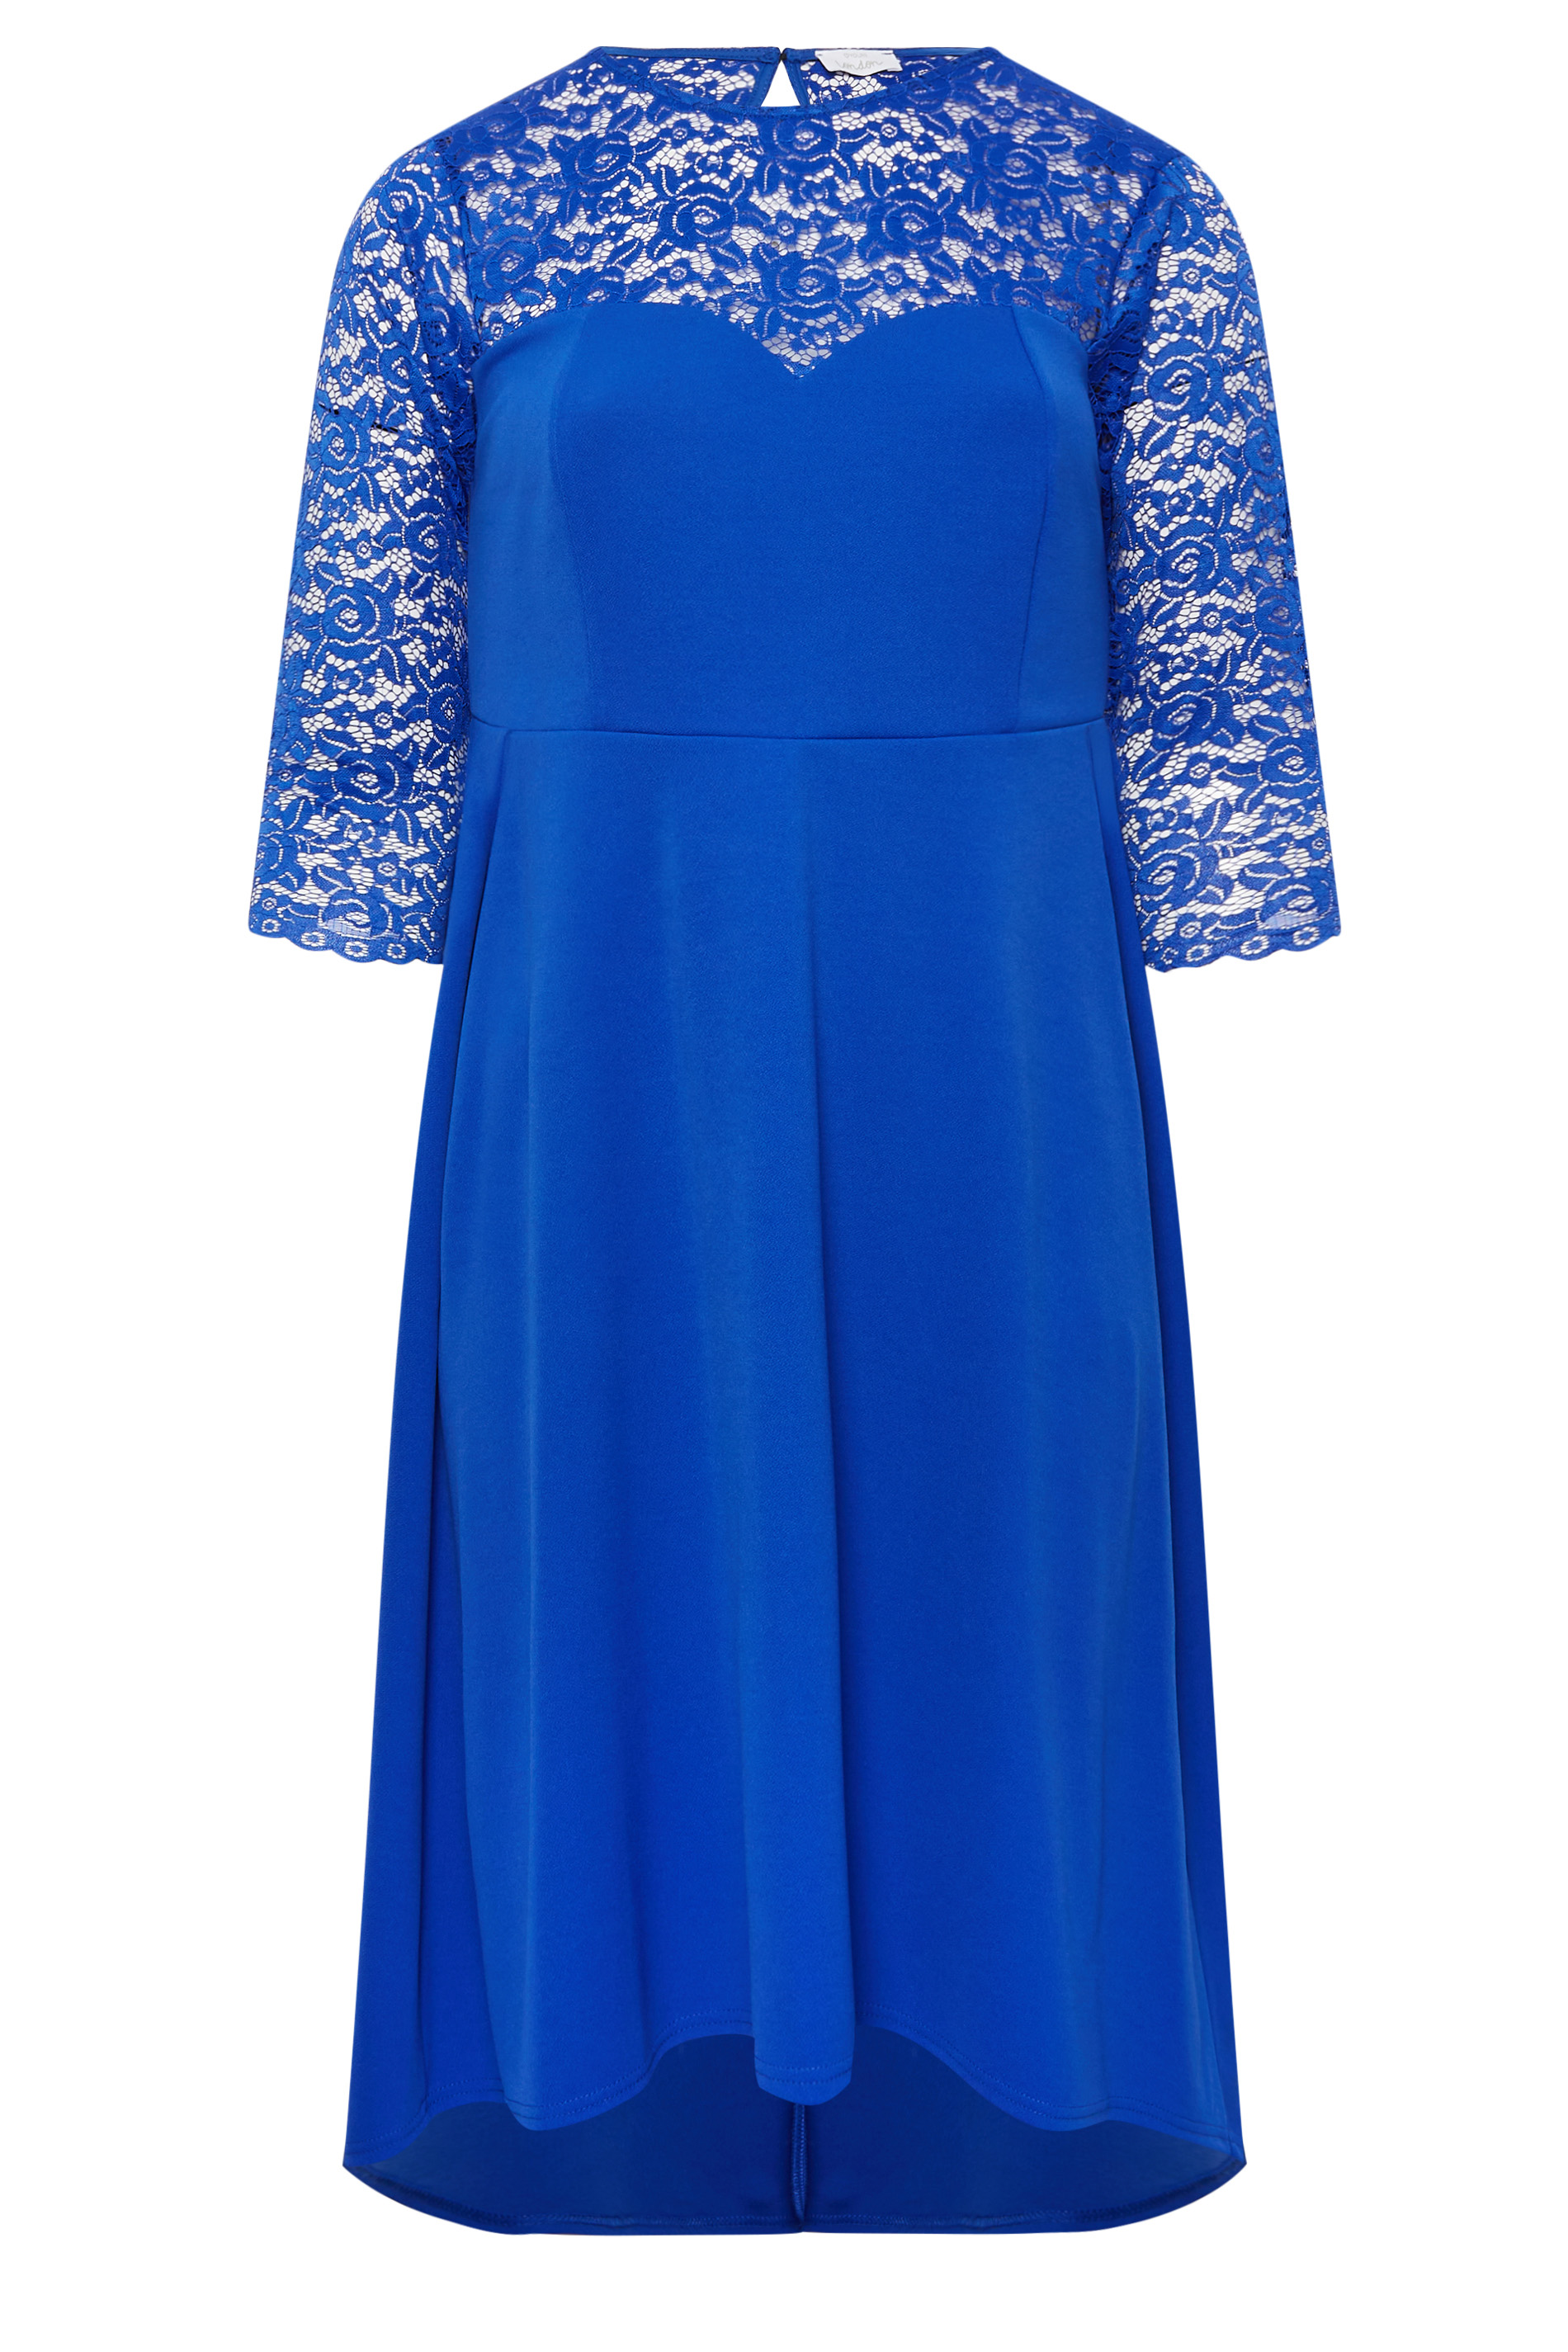 Womens 24 Wide Royal Blue Formal Dress With Tummy Control, 3/4 Length  Sleeves 